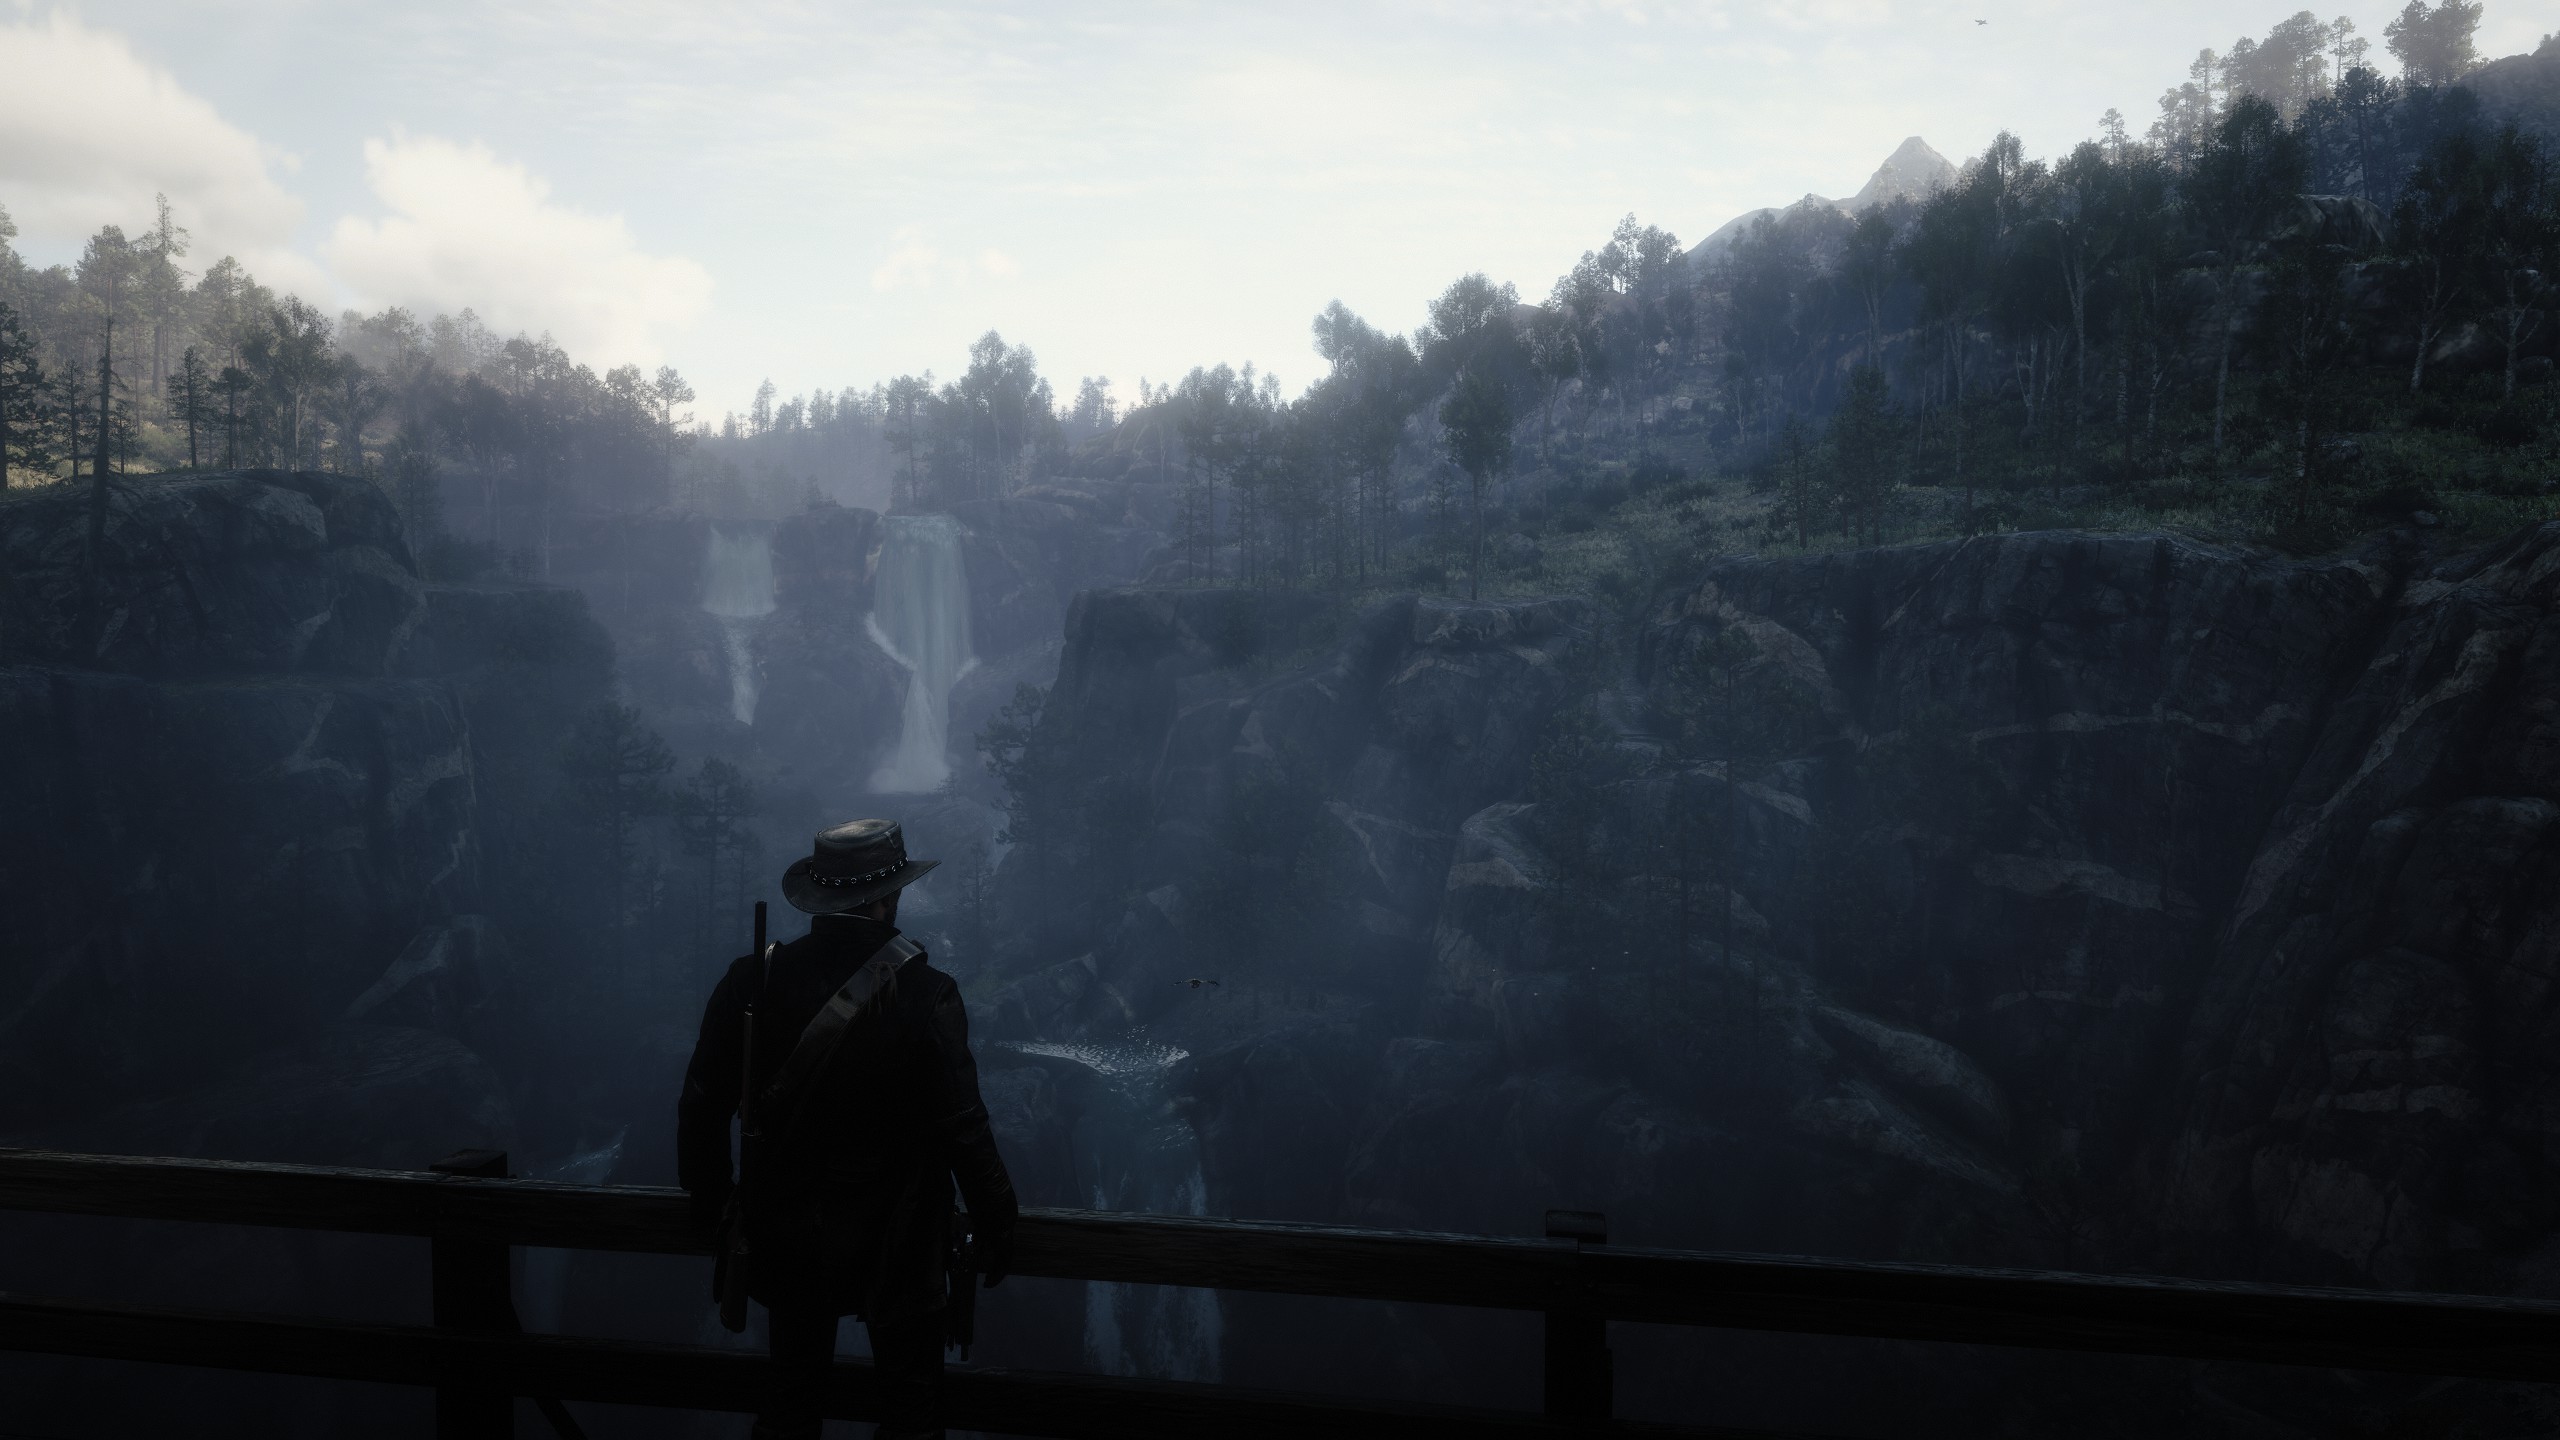 General 2560x1440 Red Dead Redemption 2 John Marston screen shot PC gaming